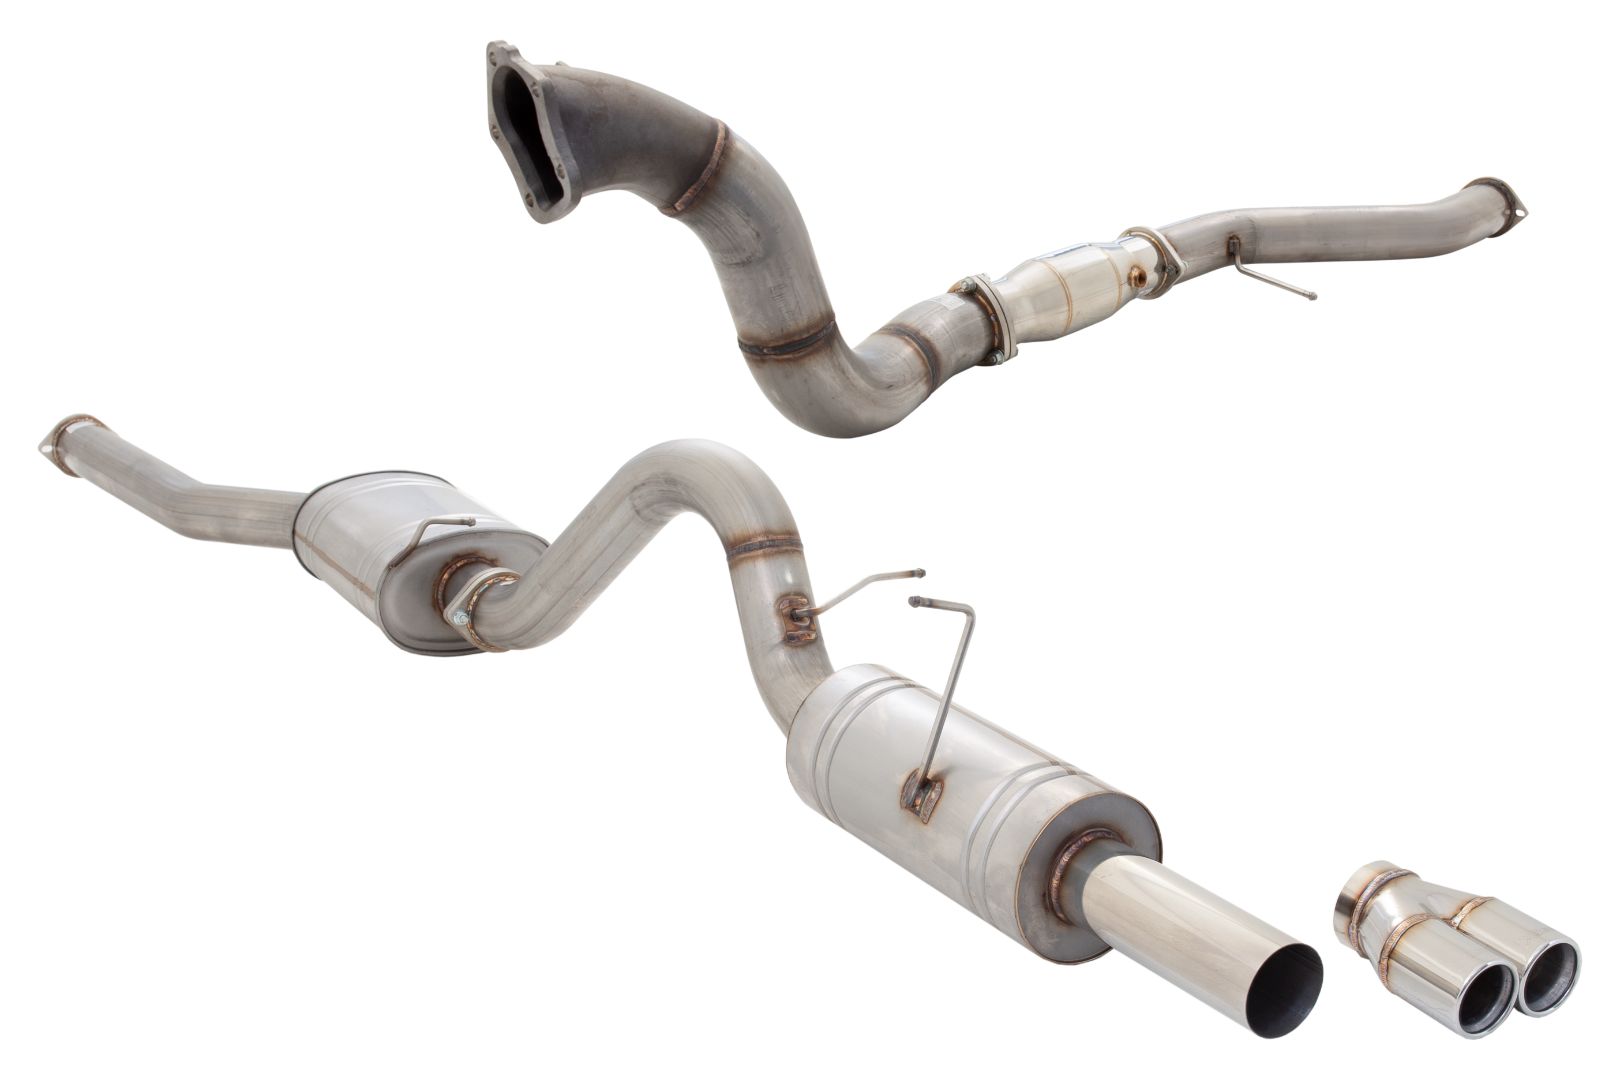 Ford BA BF Falcon Turbo Ute 3.5inch Turbo Back Exhaust System